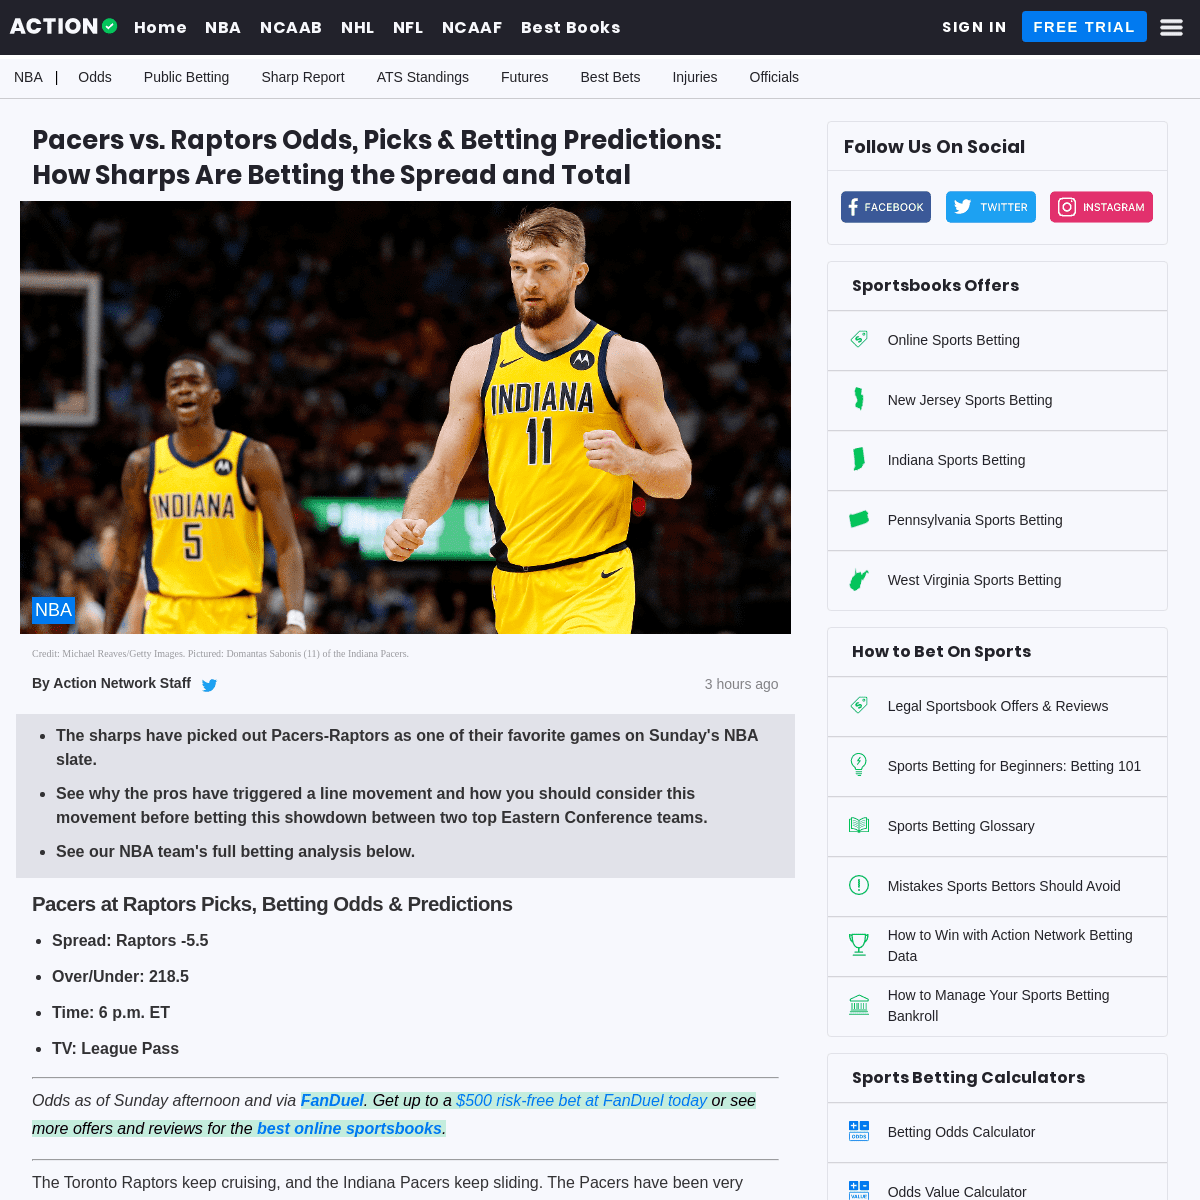 A complete backup of www.actionnetwork.com/nba/pacers-vs-raptors-odds-picks-betting-predictions-february-23-2020